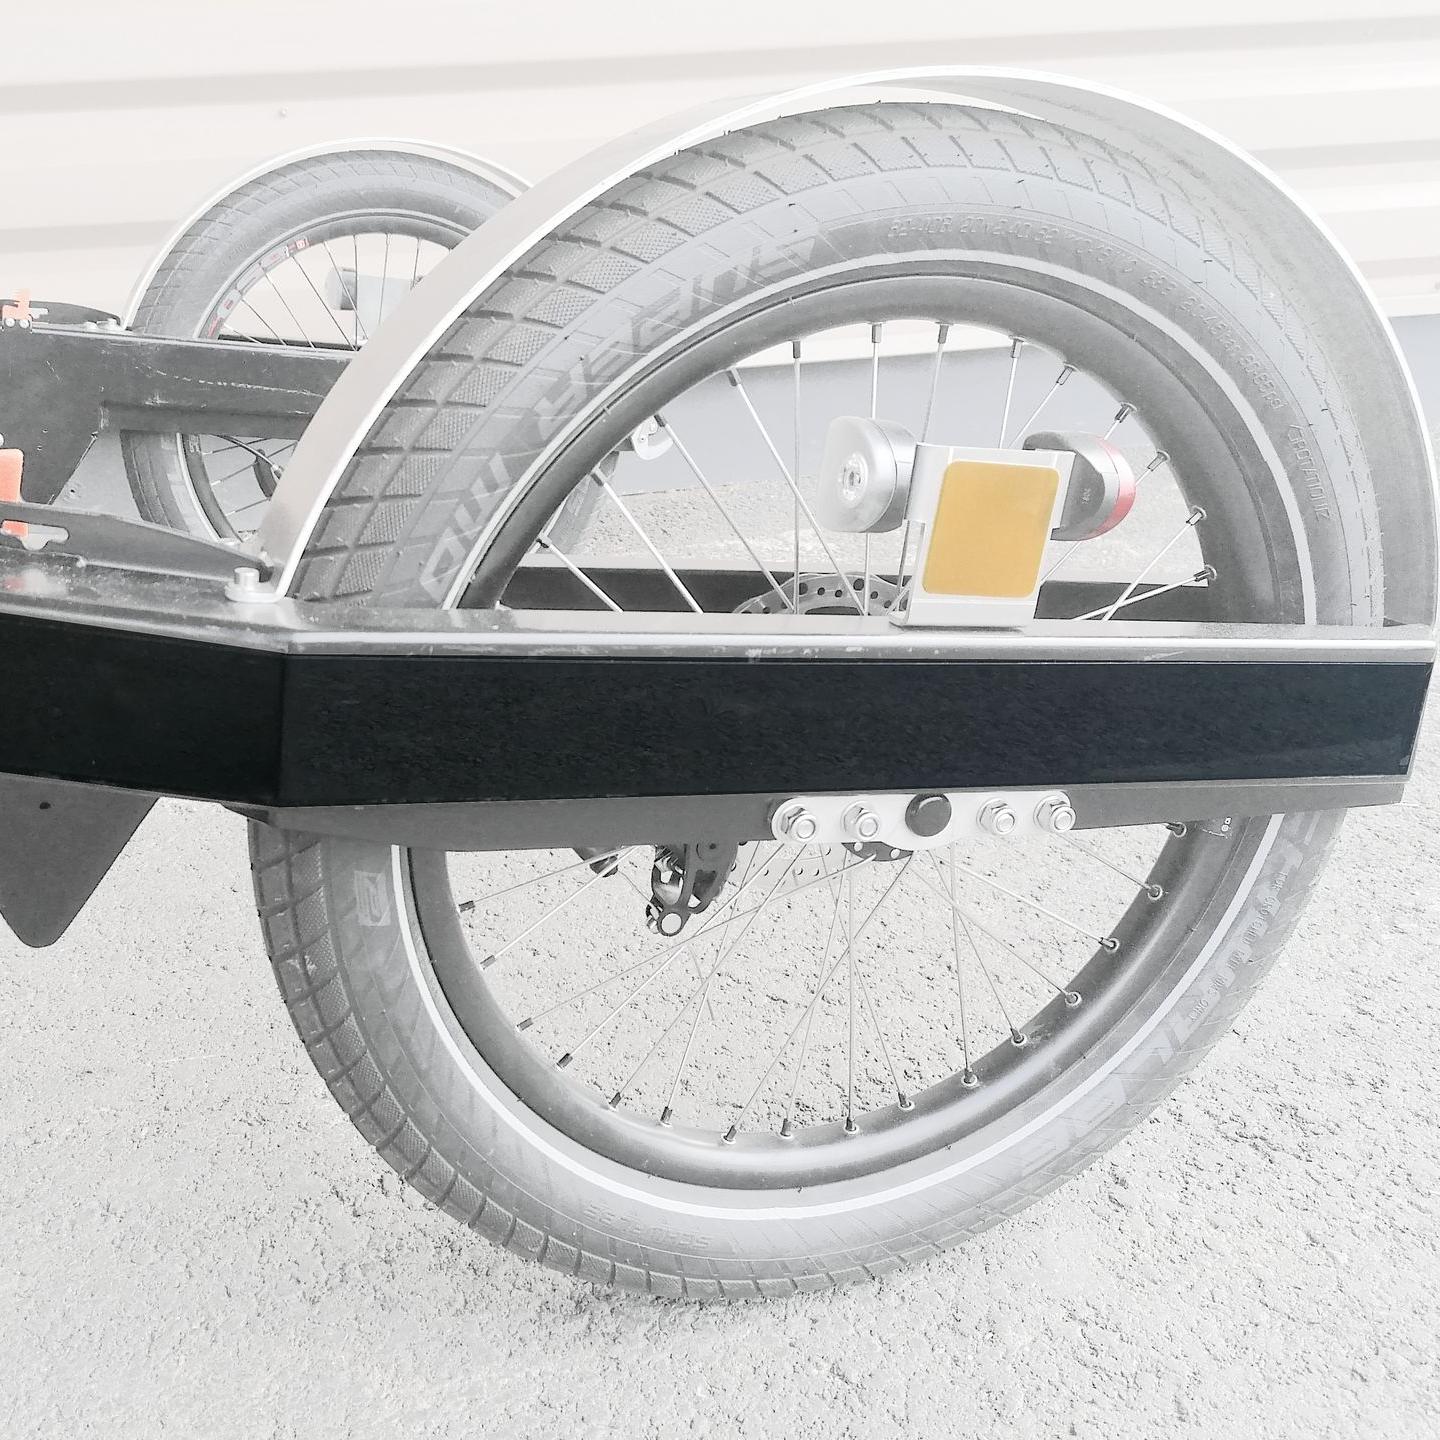 Protective bands on the BicyLift bike trailer